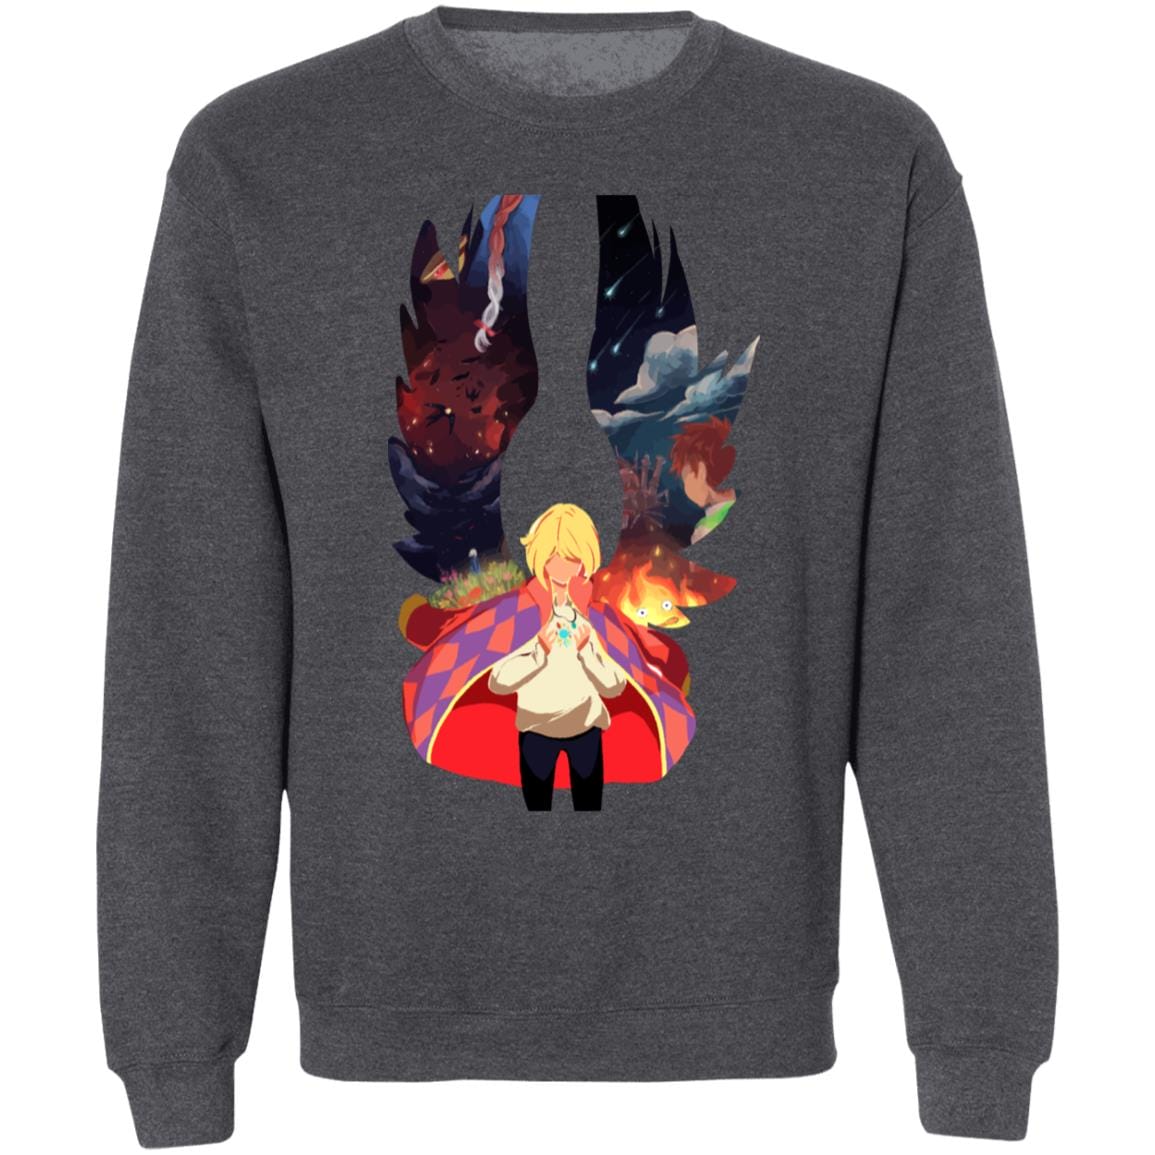 Howl and Colorful Wings Sweatshirt